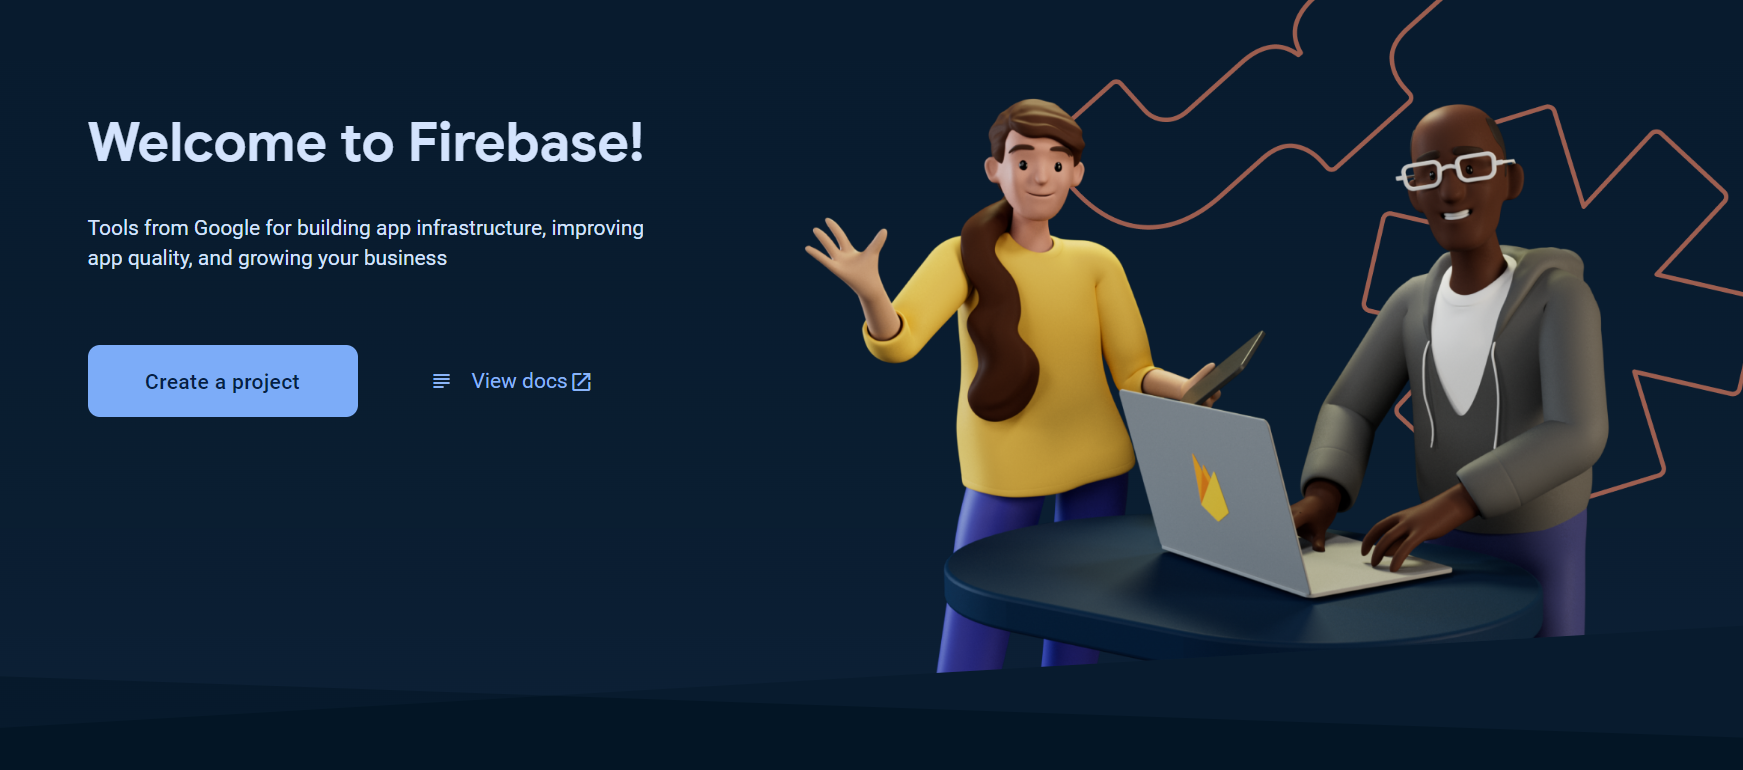 Firebase welcome page.